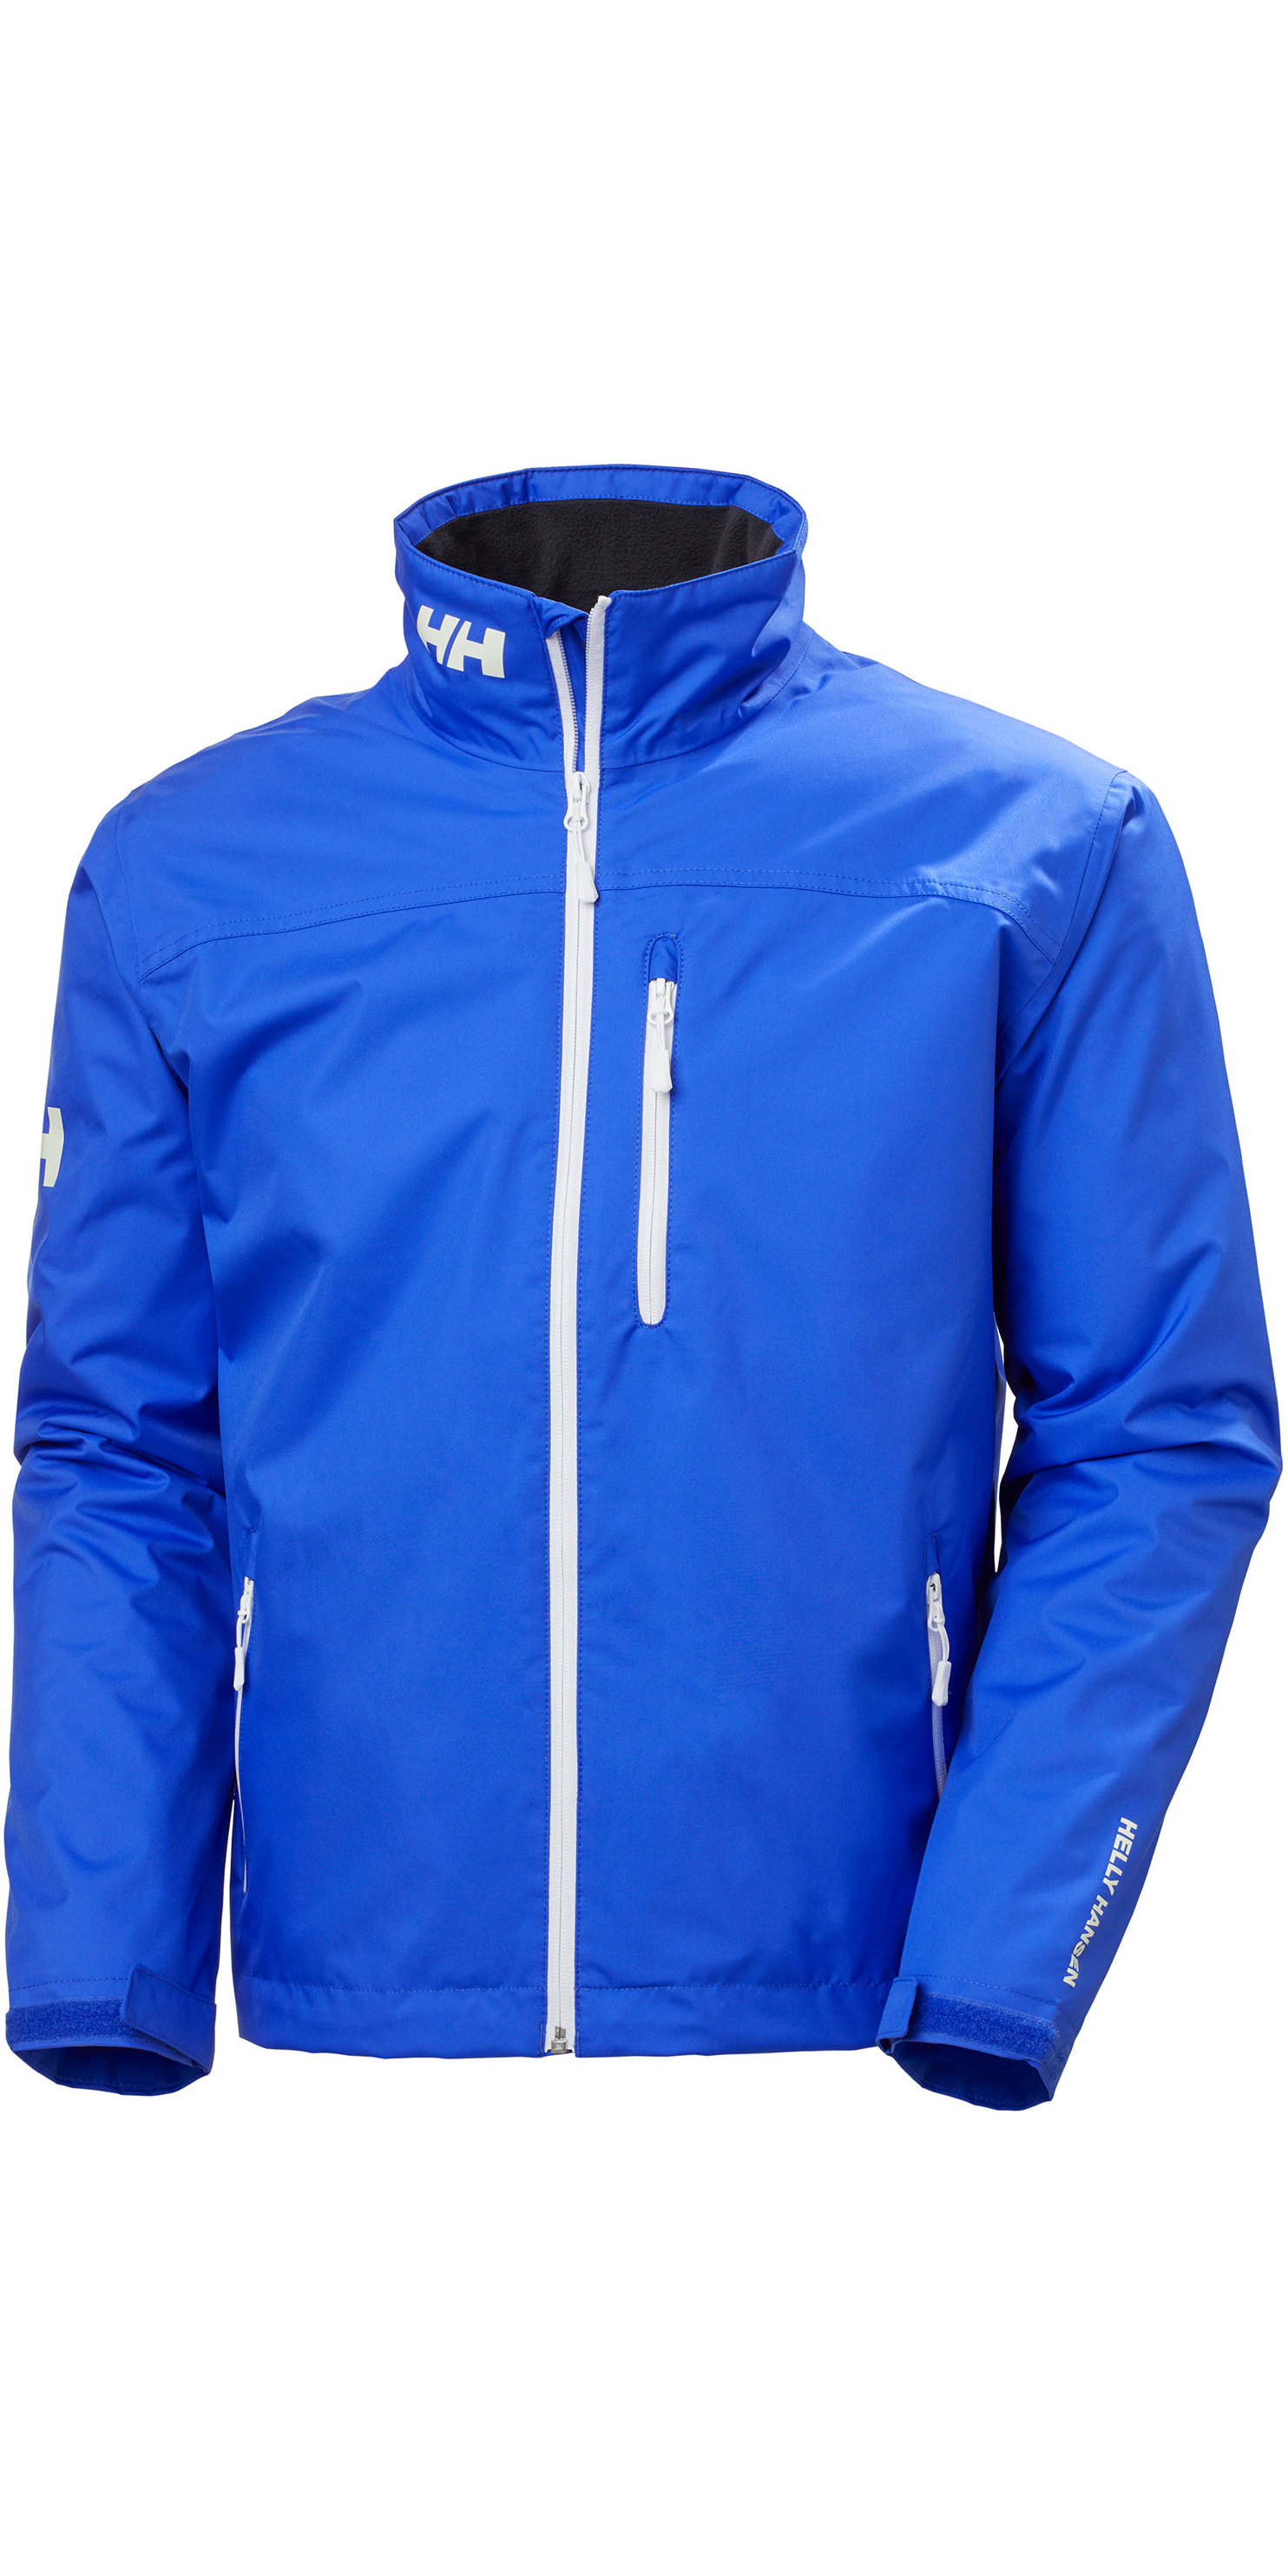 2020 Helly Hansen Mens Crew Midlayer Jacket 30253 Royal Blue Sailing Sailing Wetsuit Outlet